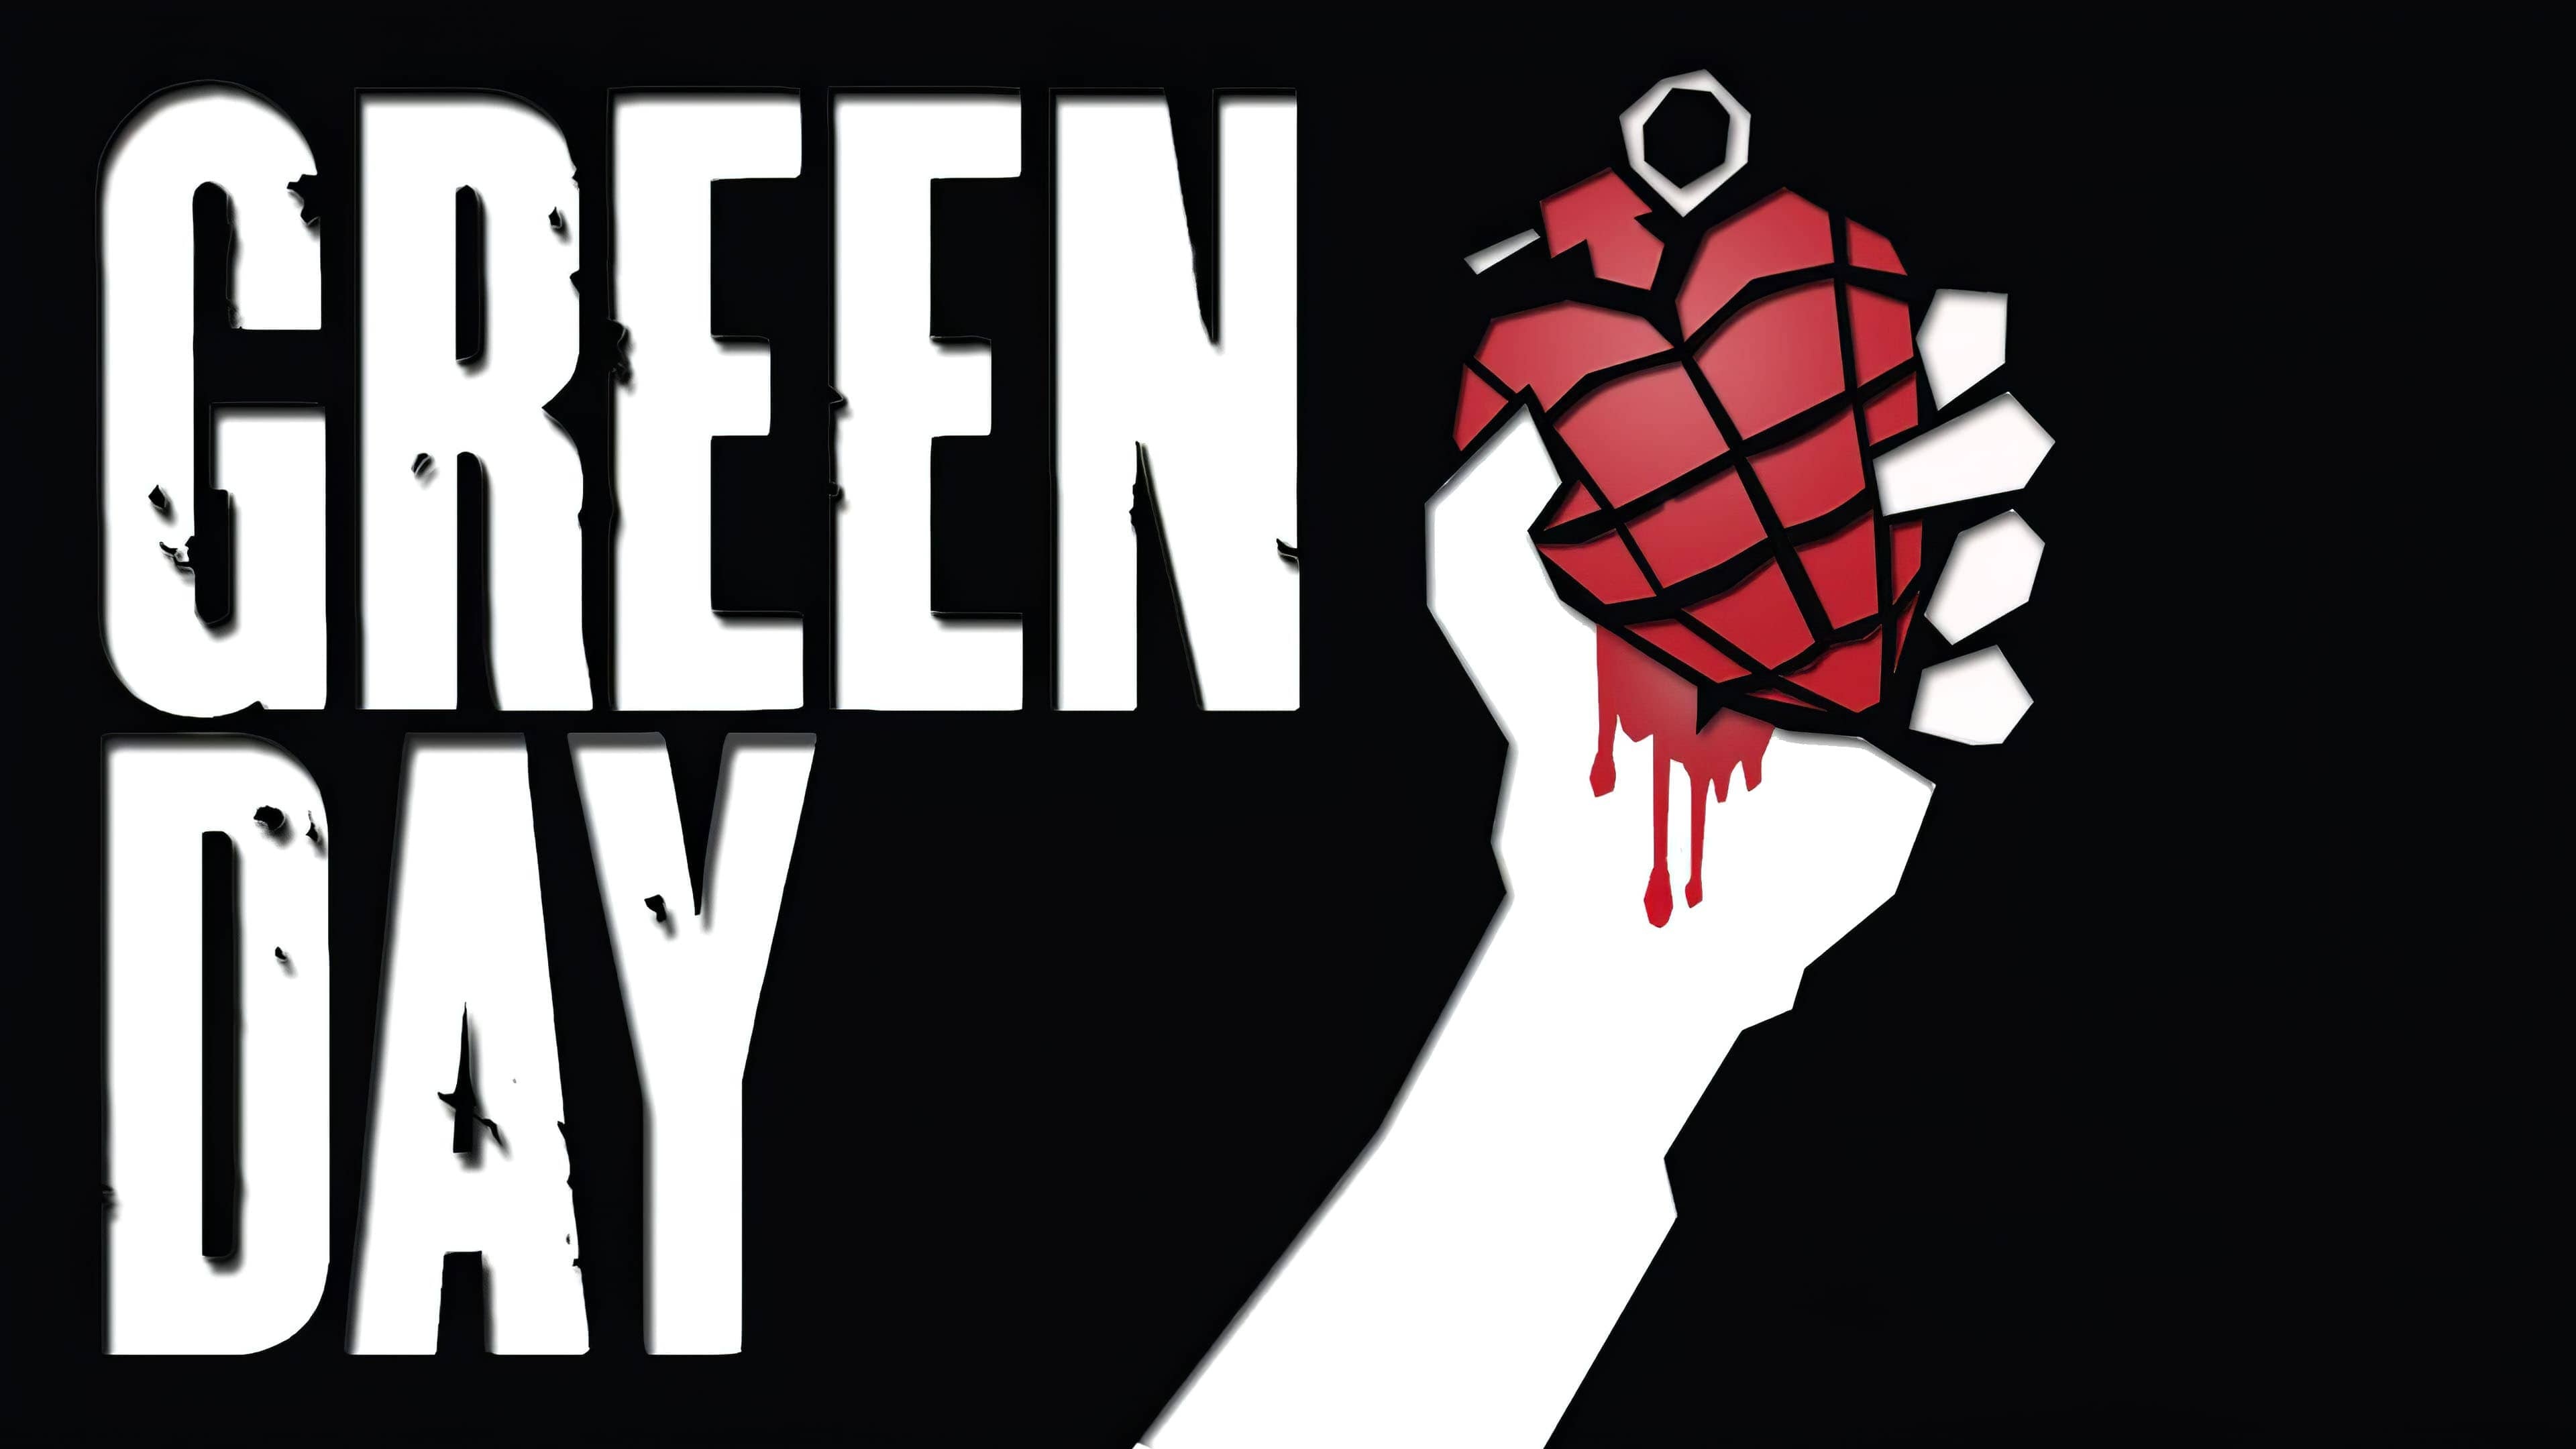 Green Day (Band): An American rock band formed in the East Bay of California in 1987 by lead vocalist and guitarist Billie Joe Armstrong. 3840x2160 4K Wallpaper.